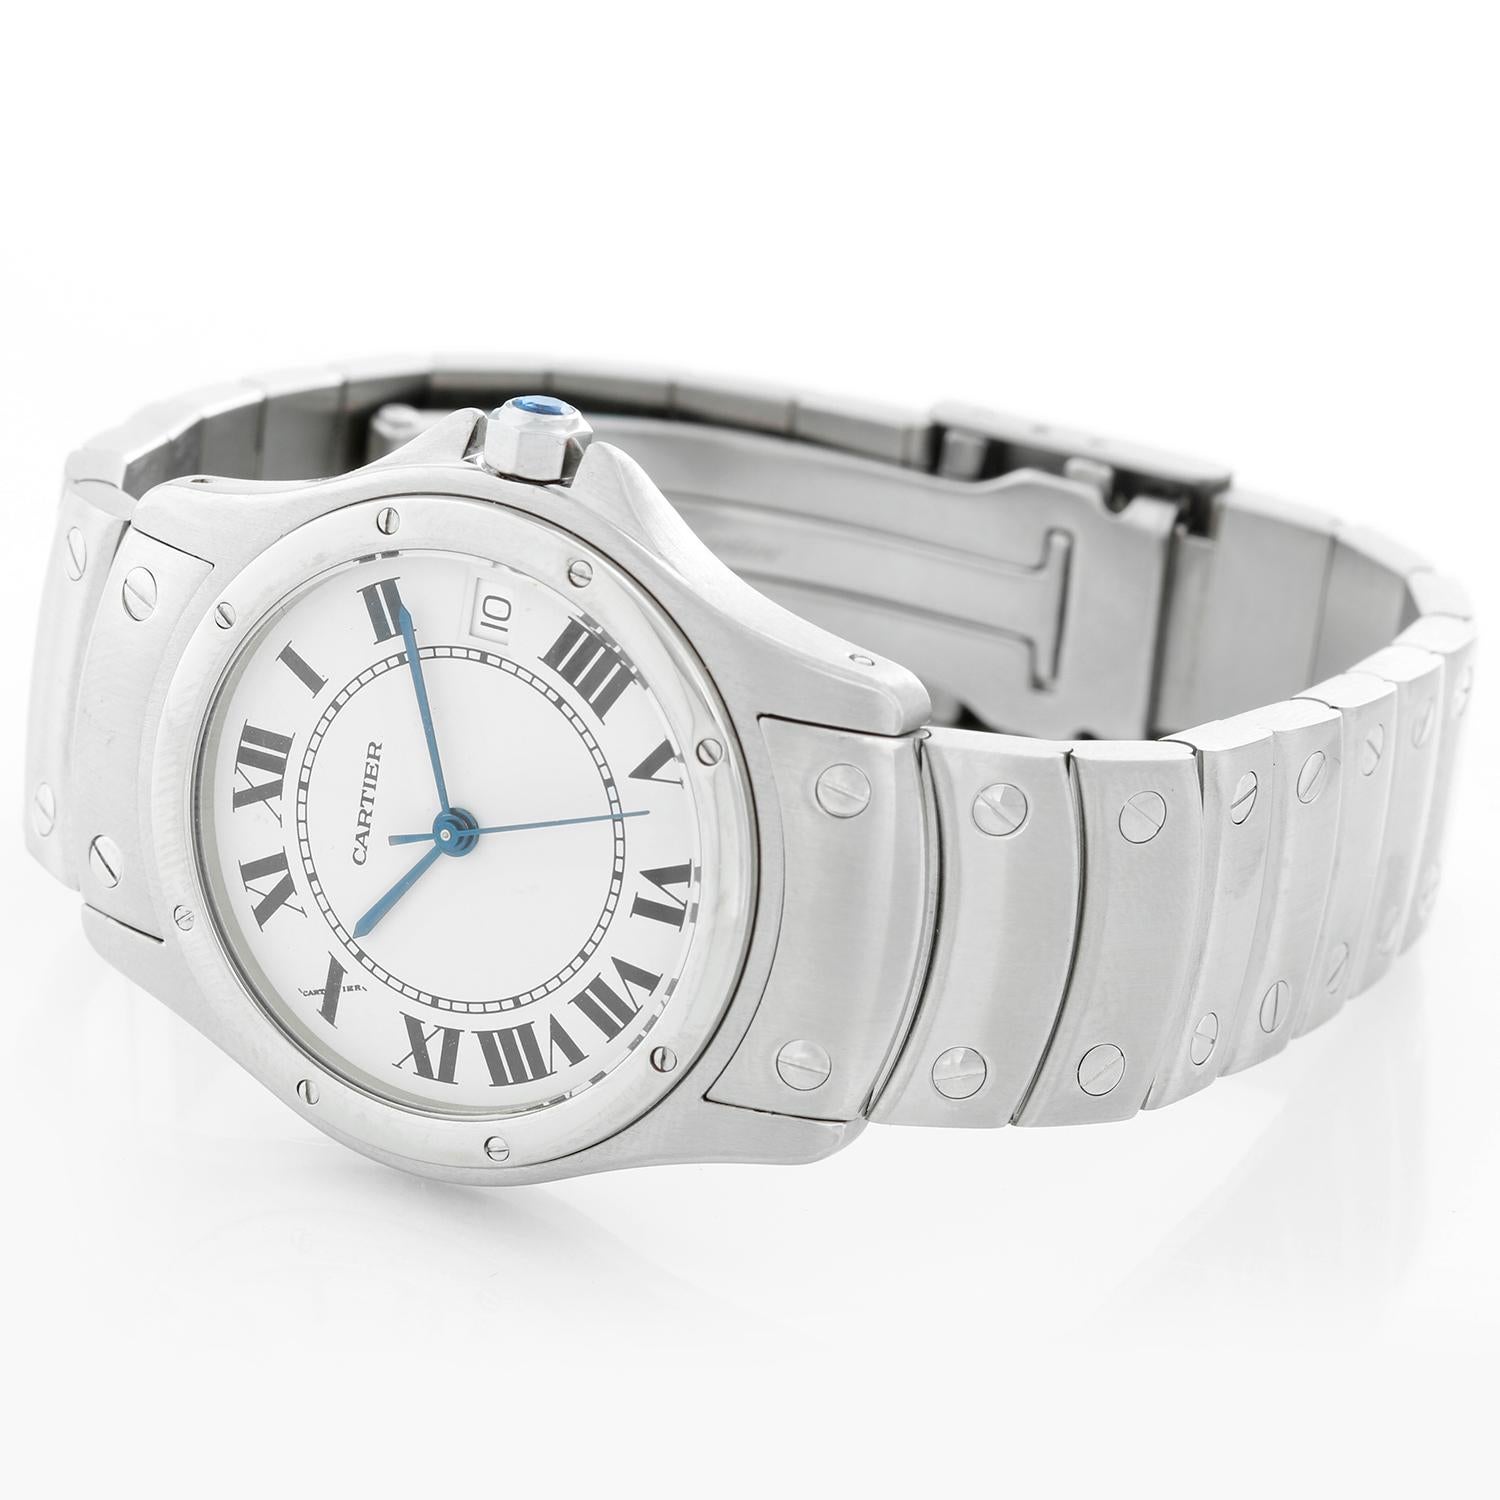 Cartier Cougar Men's/Ladies Midsize 33mm Stainless Steel Automatic Watch - Automatic . Stainless steel case (33mm diameter). White colored dial with black Roman numerals; date at 3 o'clock position. Stainless steel bracelet; will fit up to a 7 inch